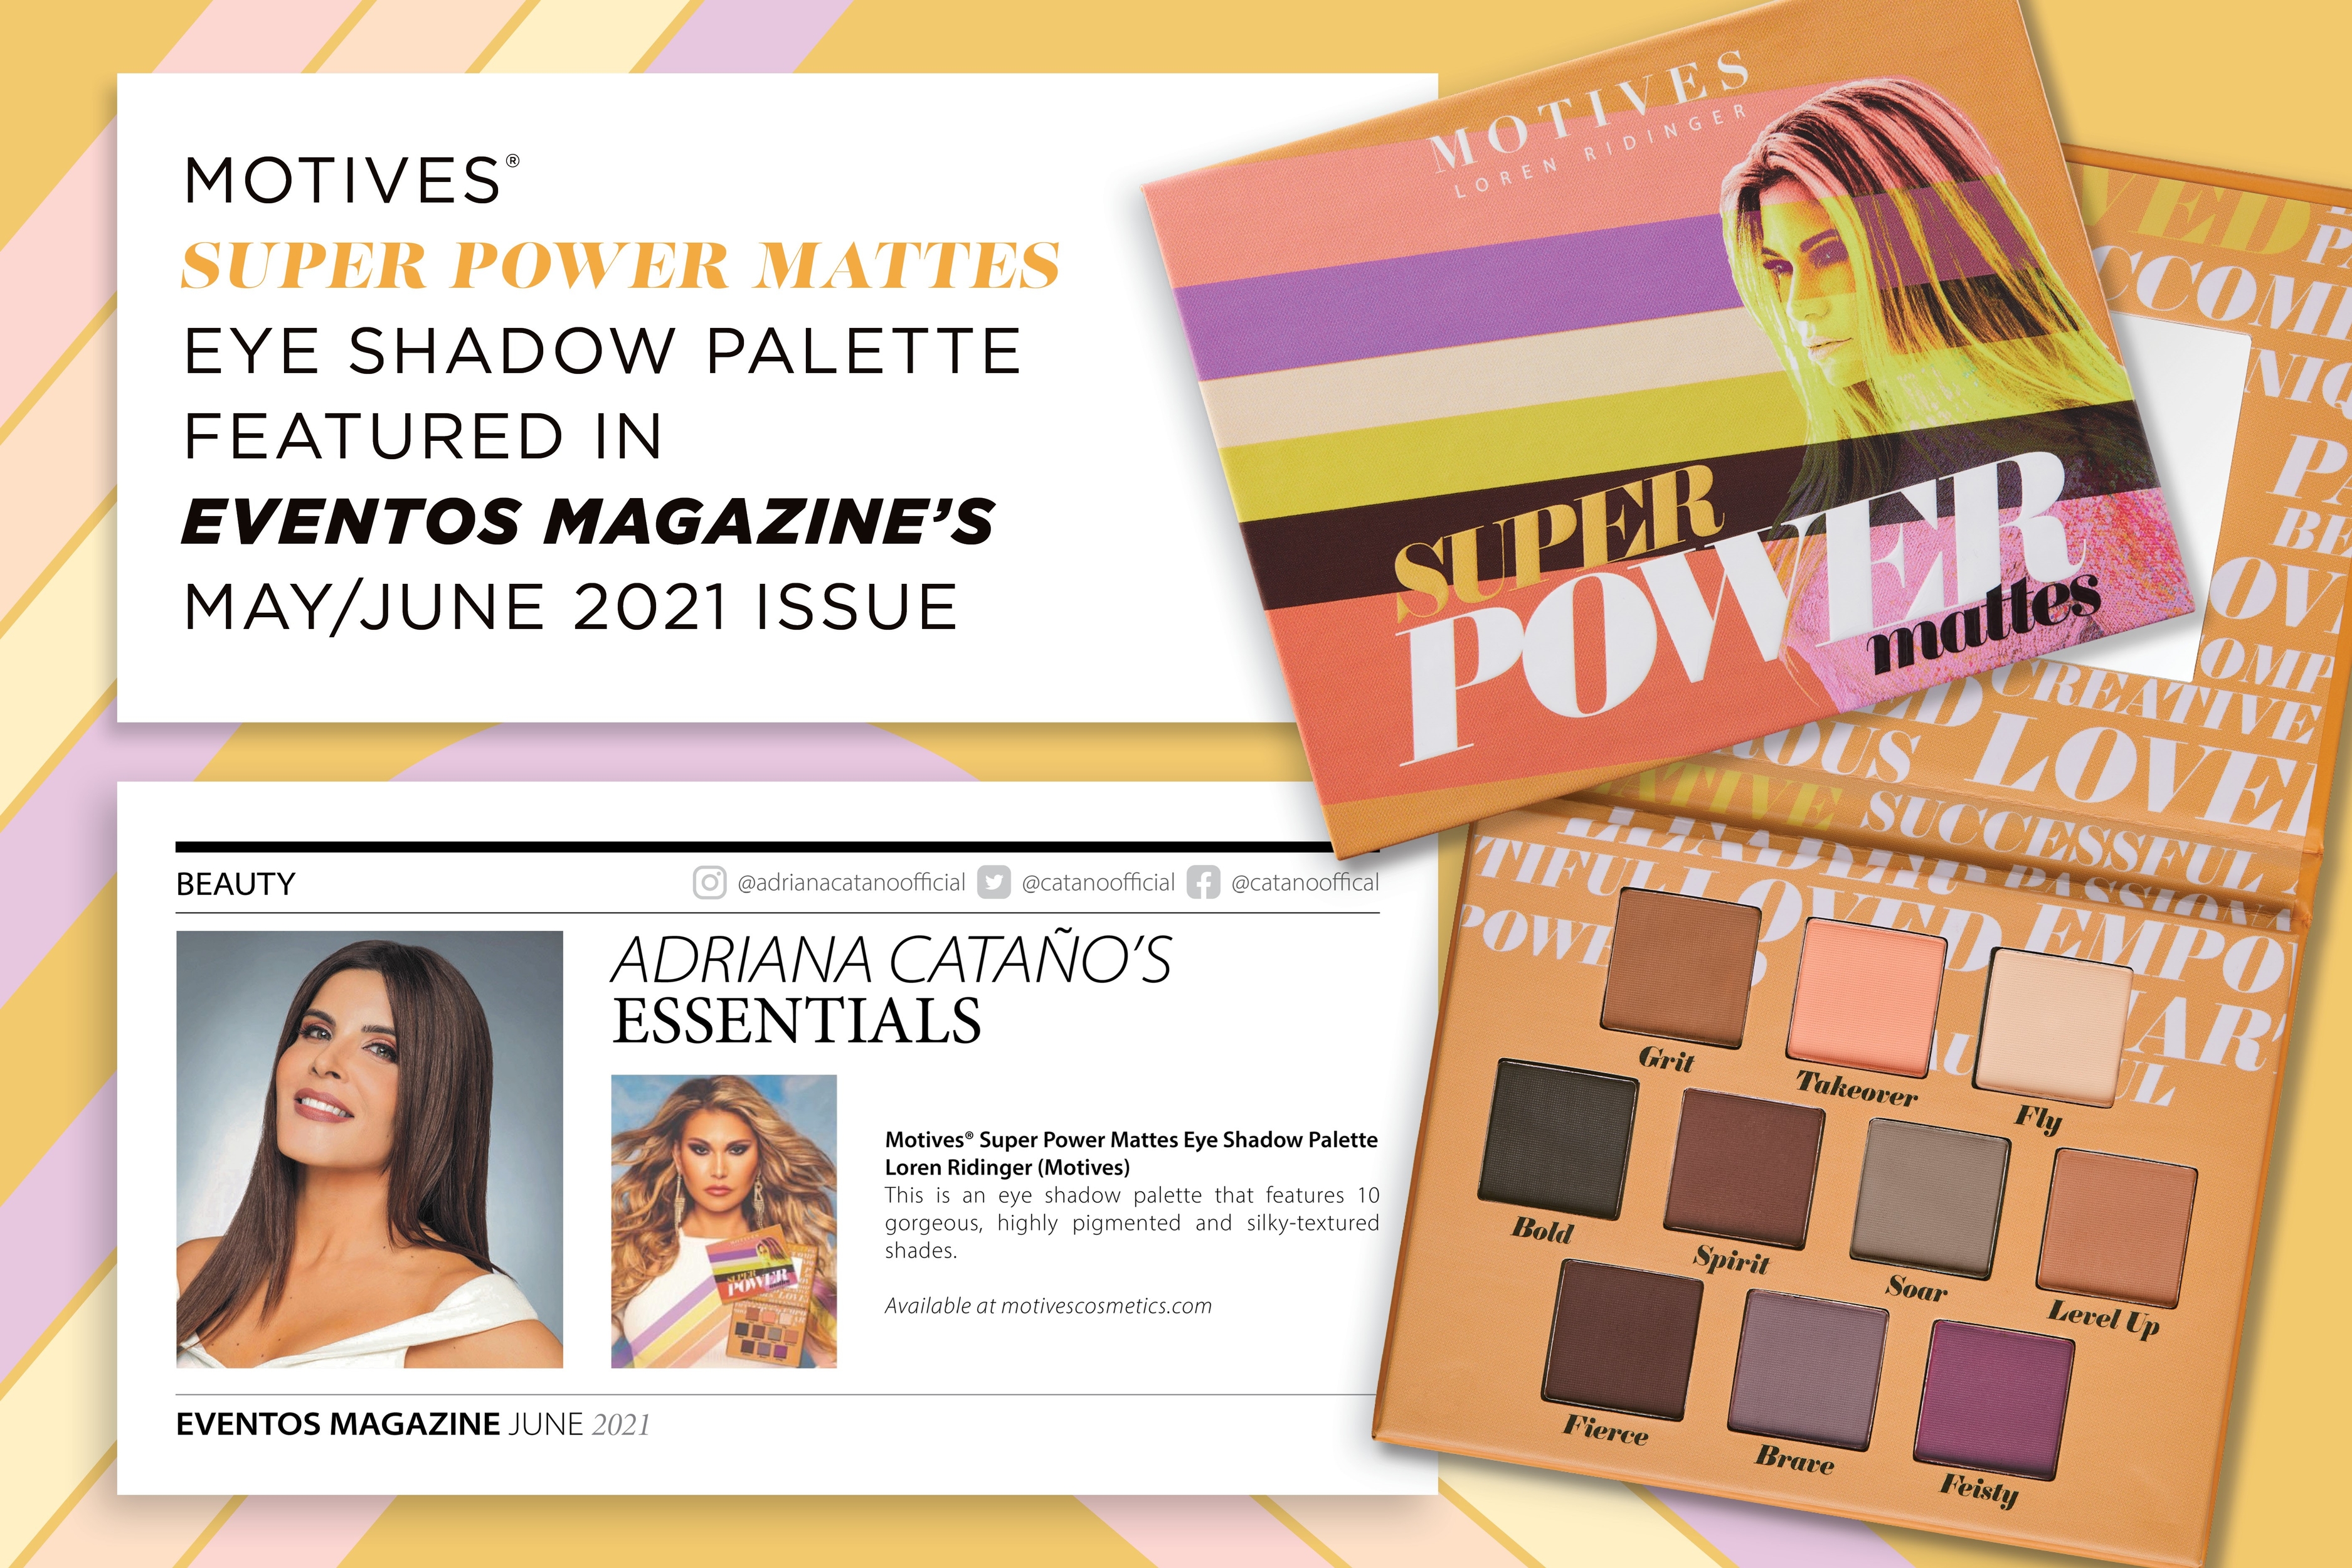 What is Eventos Magazine saying about Motives Founder, Loren Ridinger's new Super Power Eye Shadow Palette?